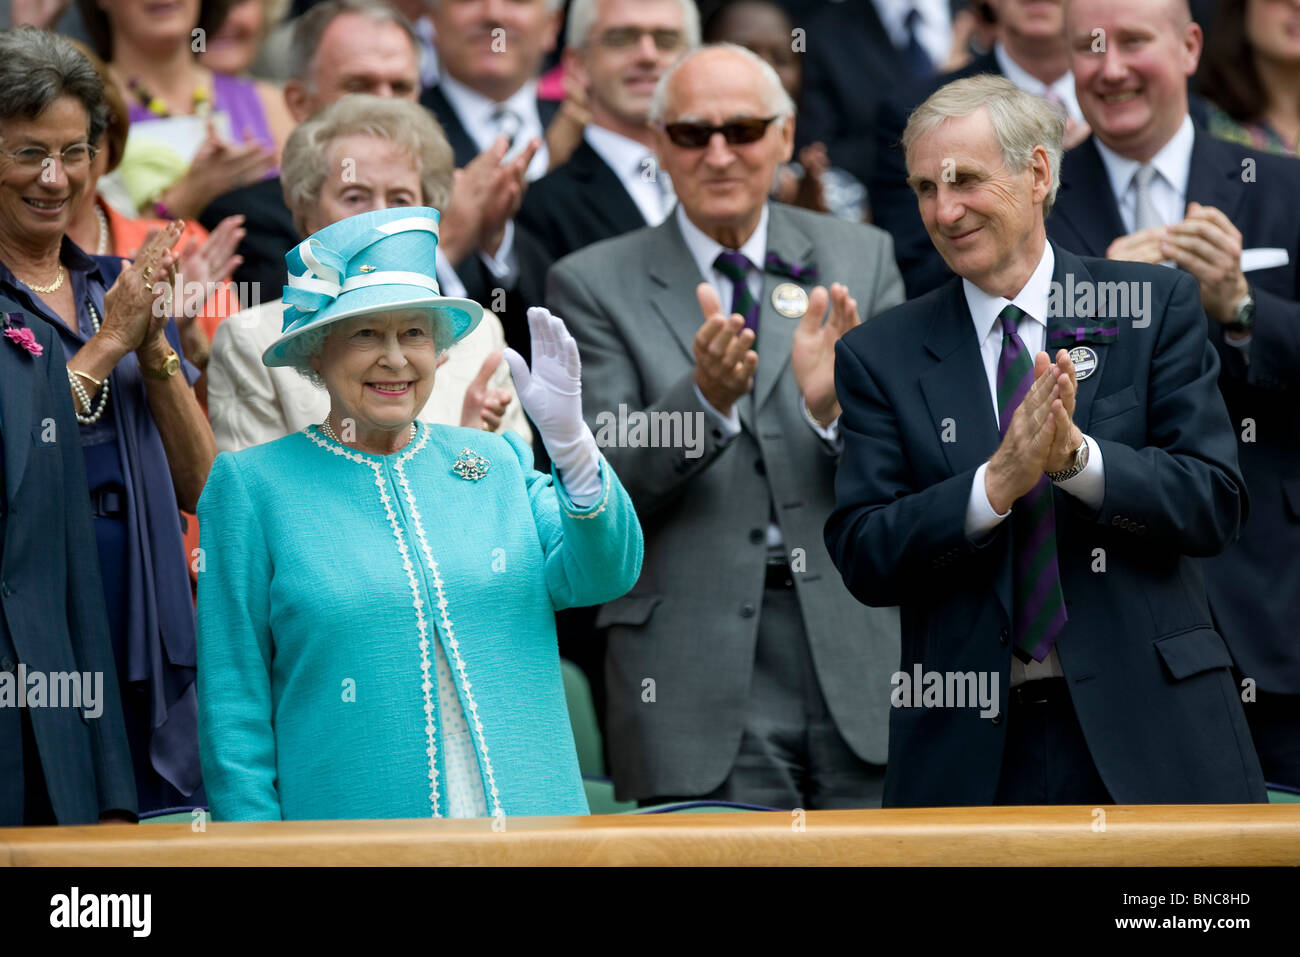 HRH Queen Elizabeth II waves as she arrives in the royal box during the Wimbledon Tennis Championships 2010 Stock Photo